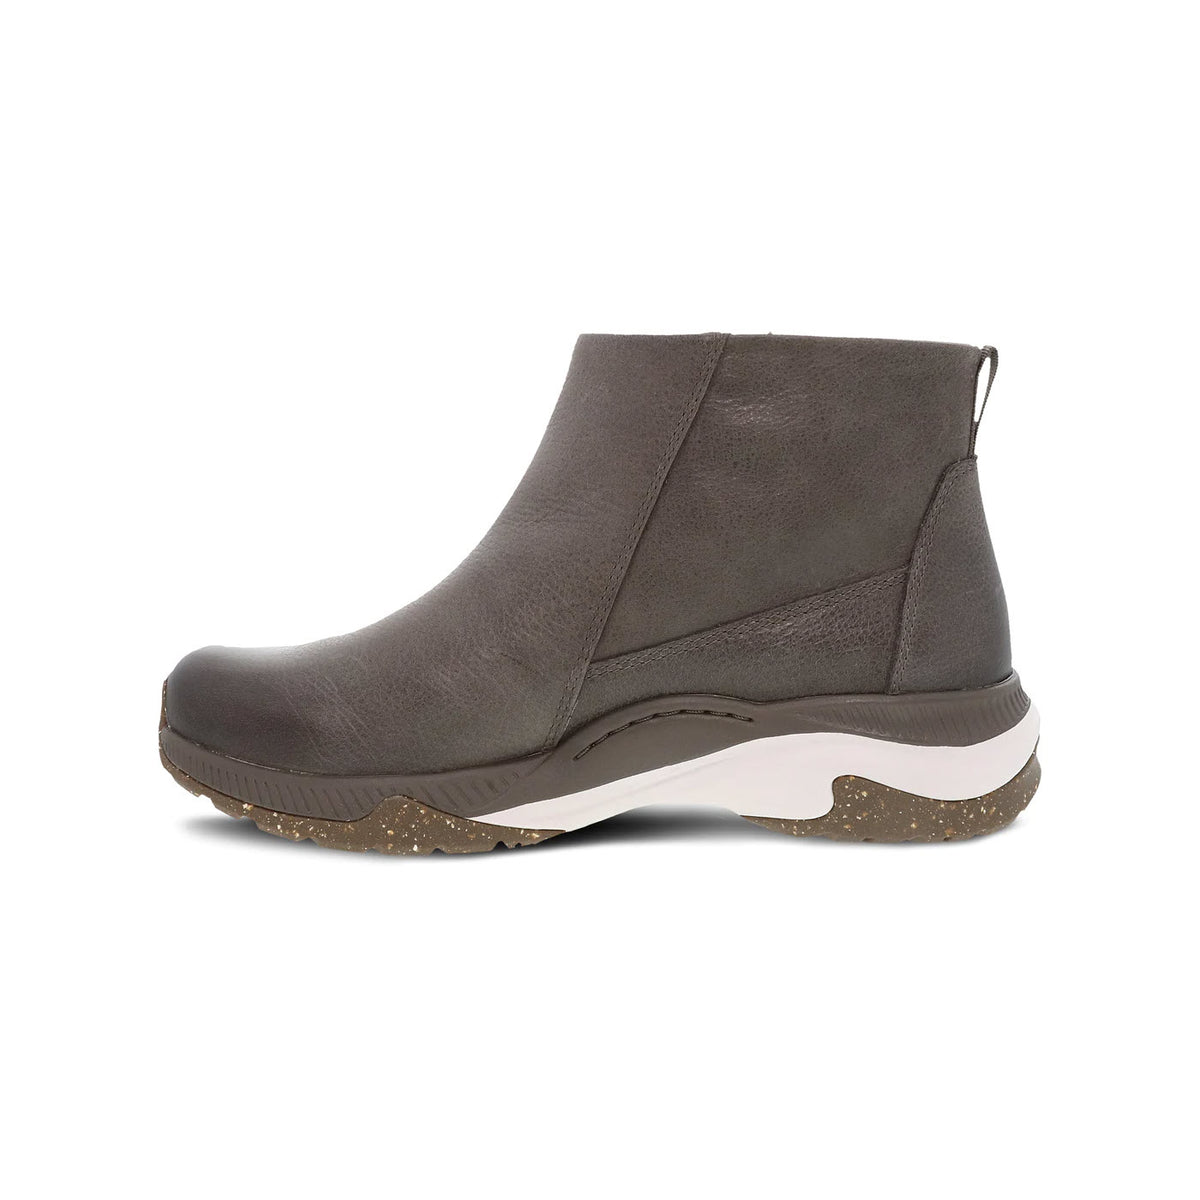 Side view of a gray ankle boot with a low heel and Vibram ECOSTEP sole, isolated on a white background - Dansko Margo Morel Burnished isolation.